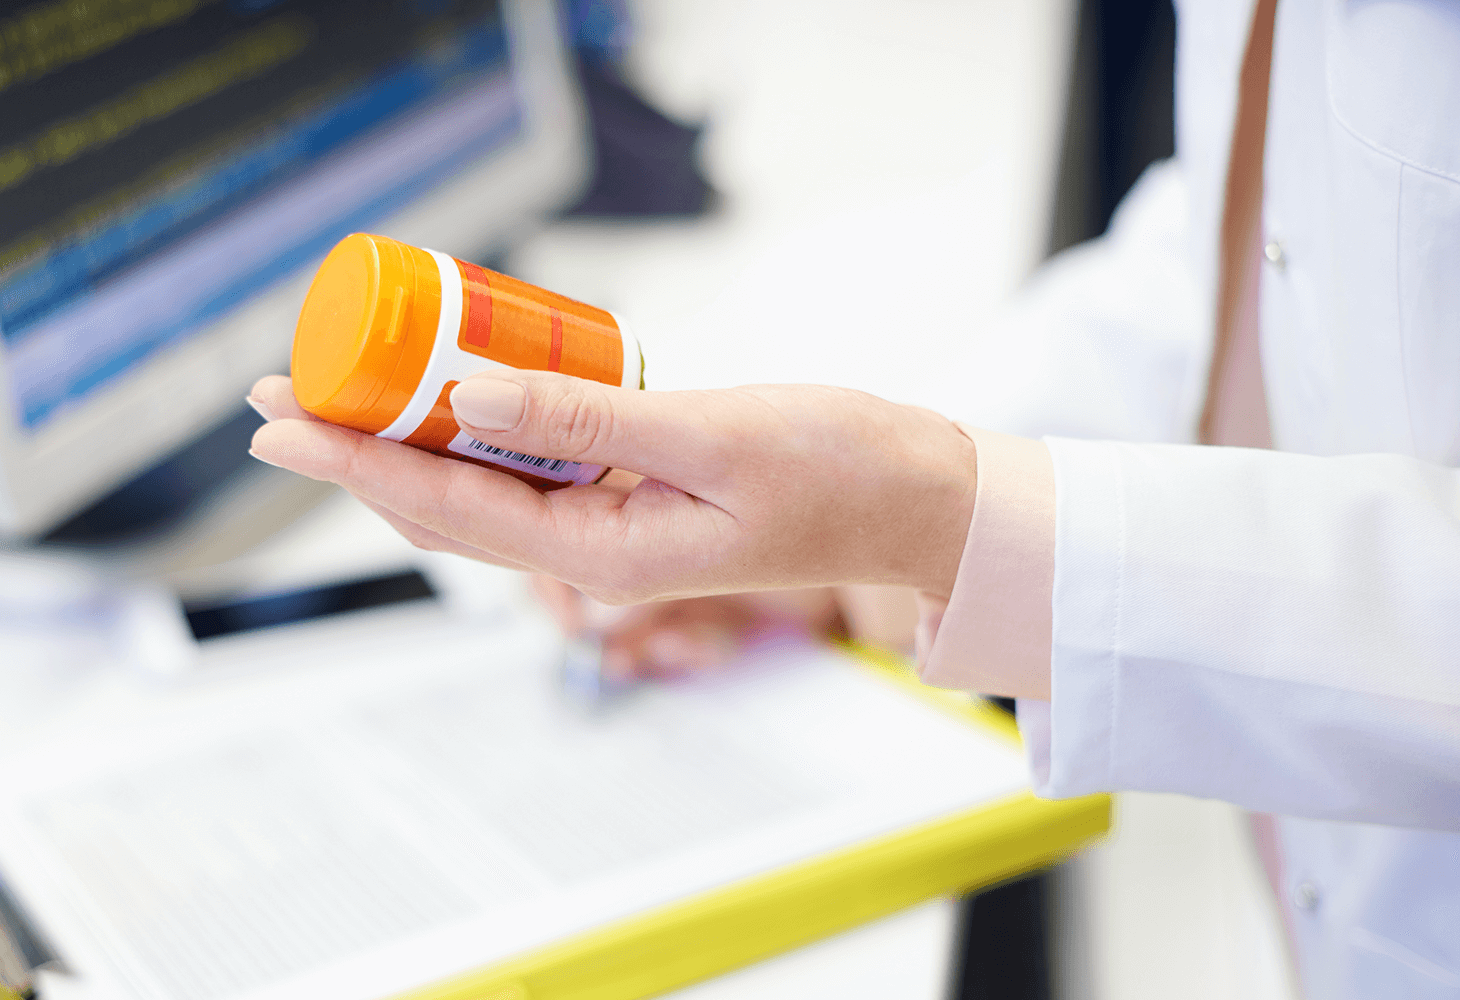 A physician holds a bottle of pills while making notes on patient's file